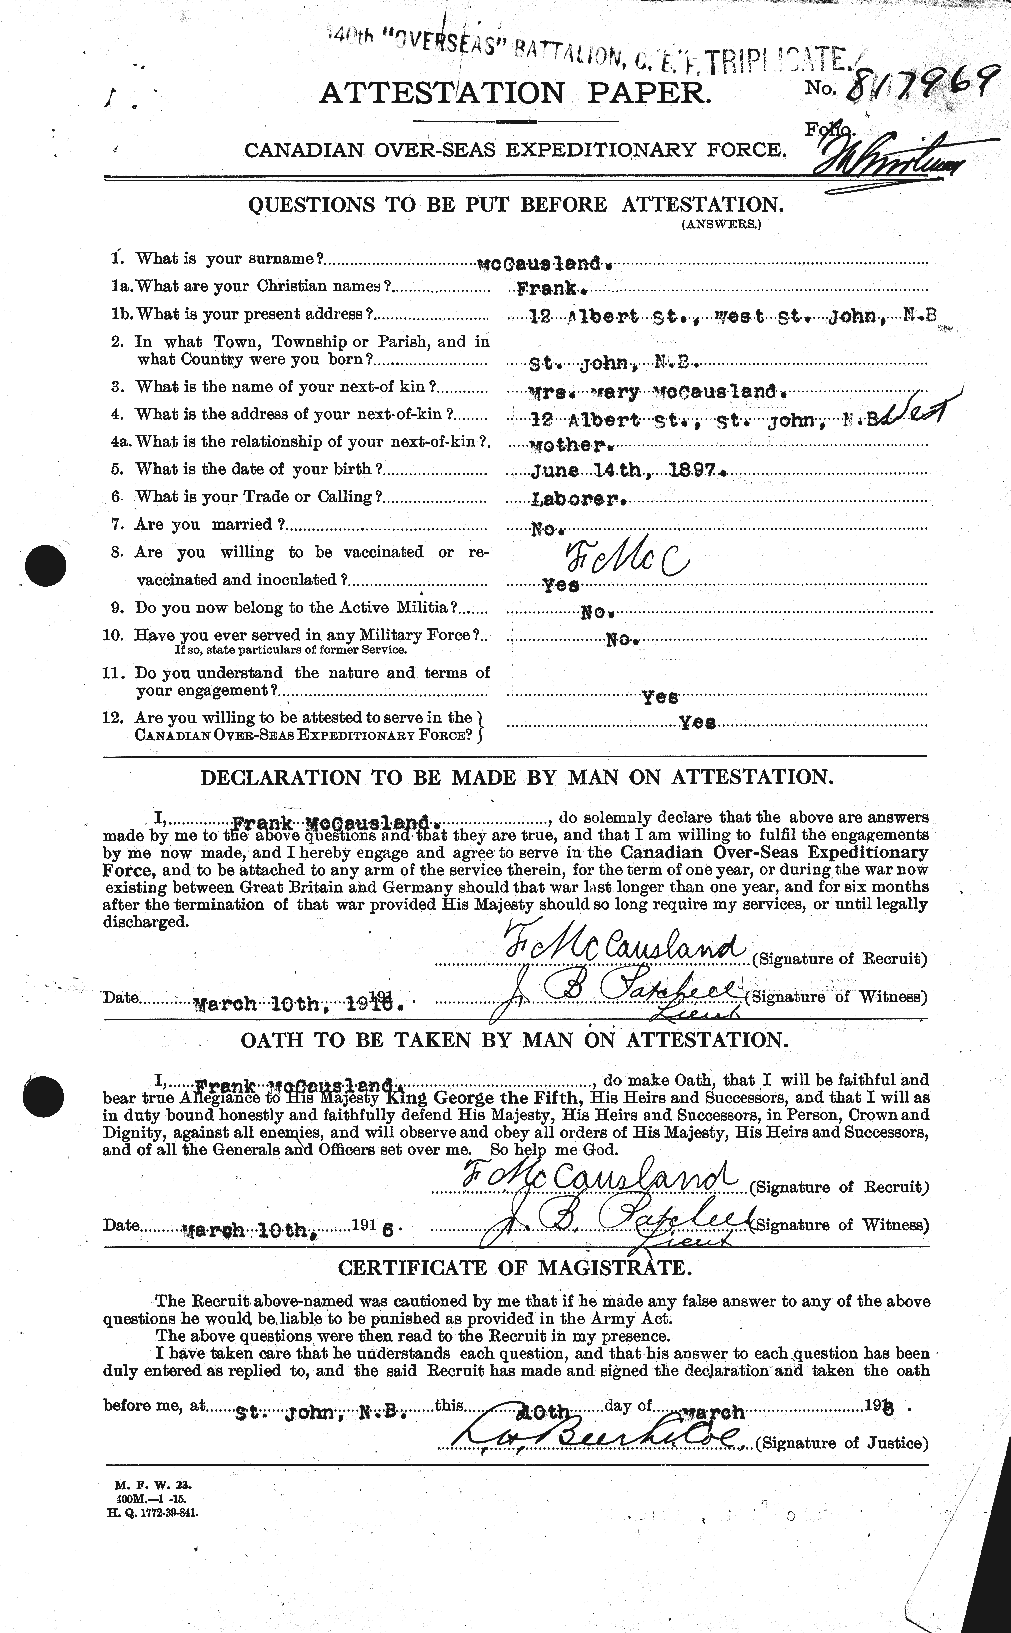 Personnel Records of the First World War - CEF 132575a